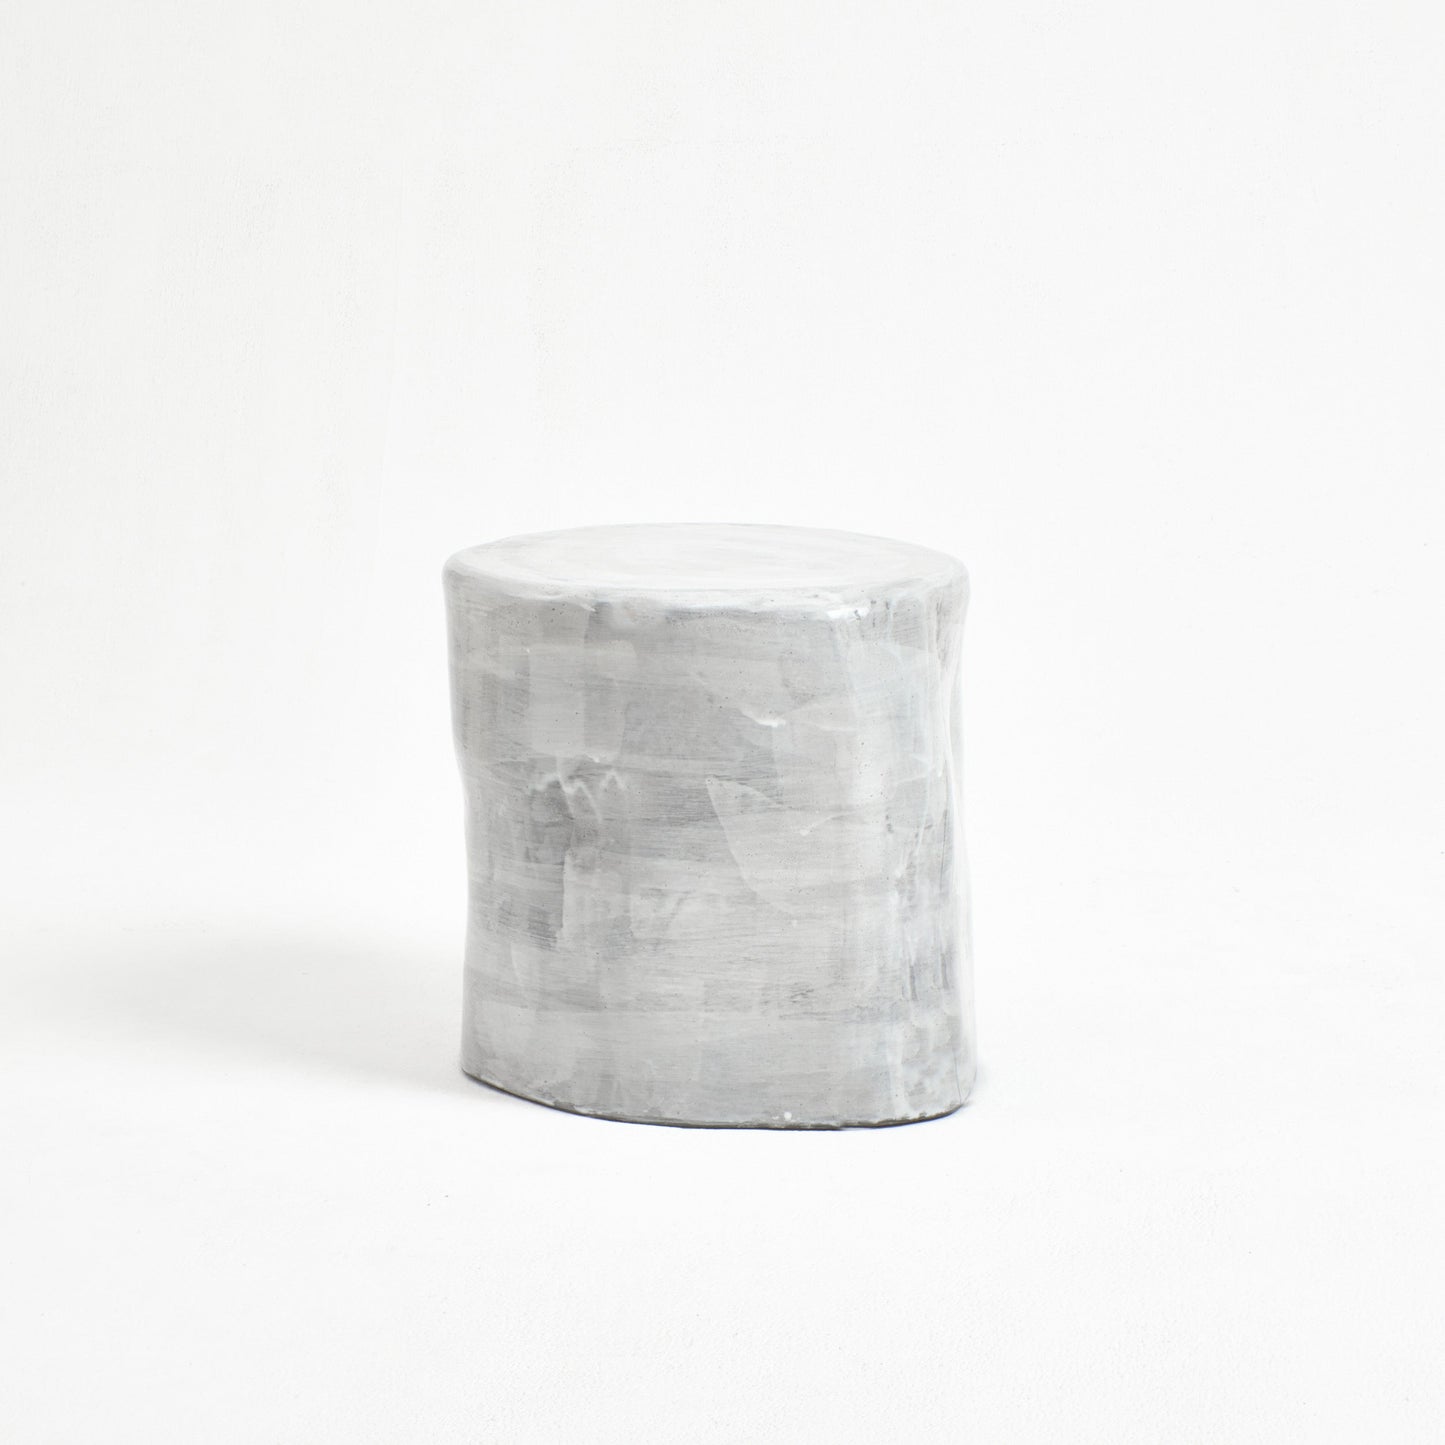 Ceramic Side Table - Small in Brushed White